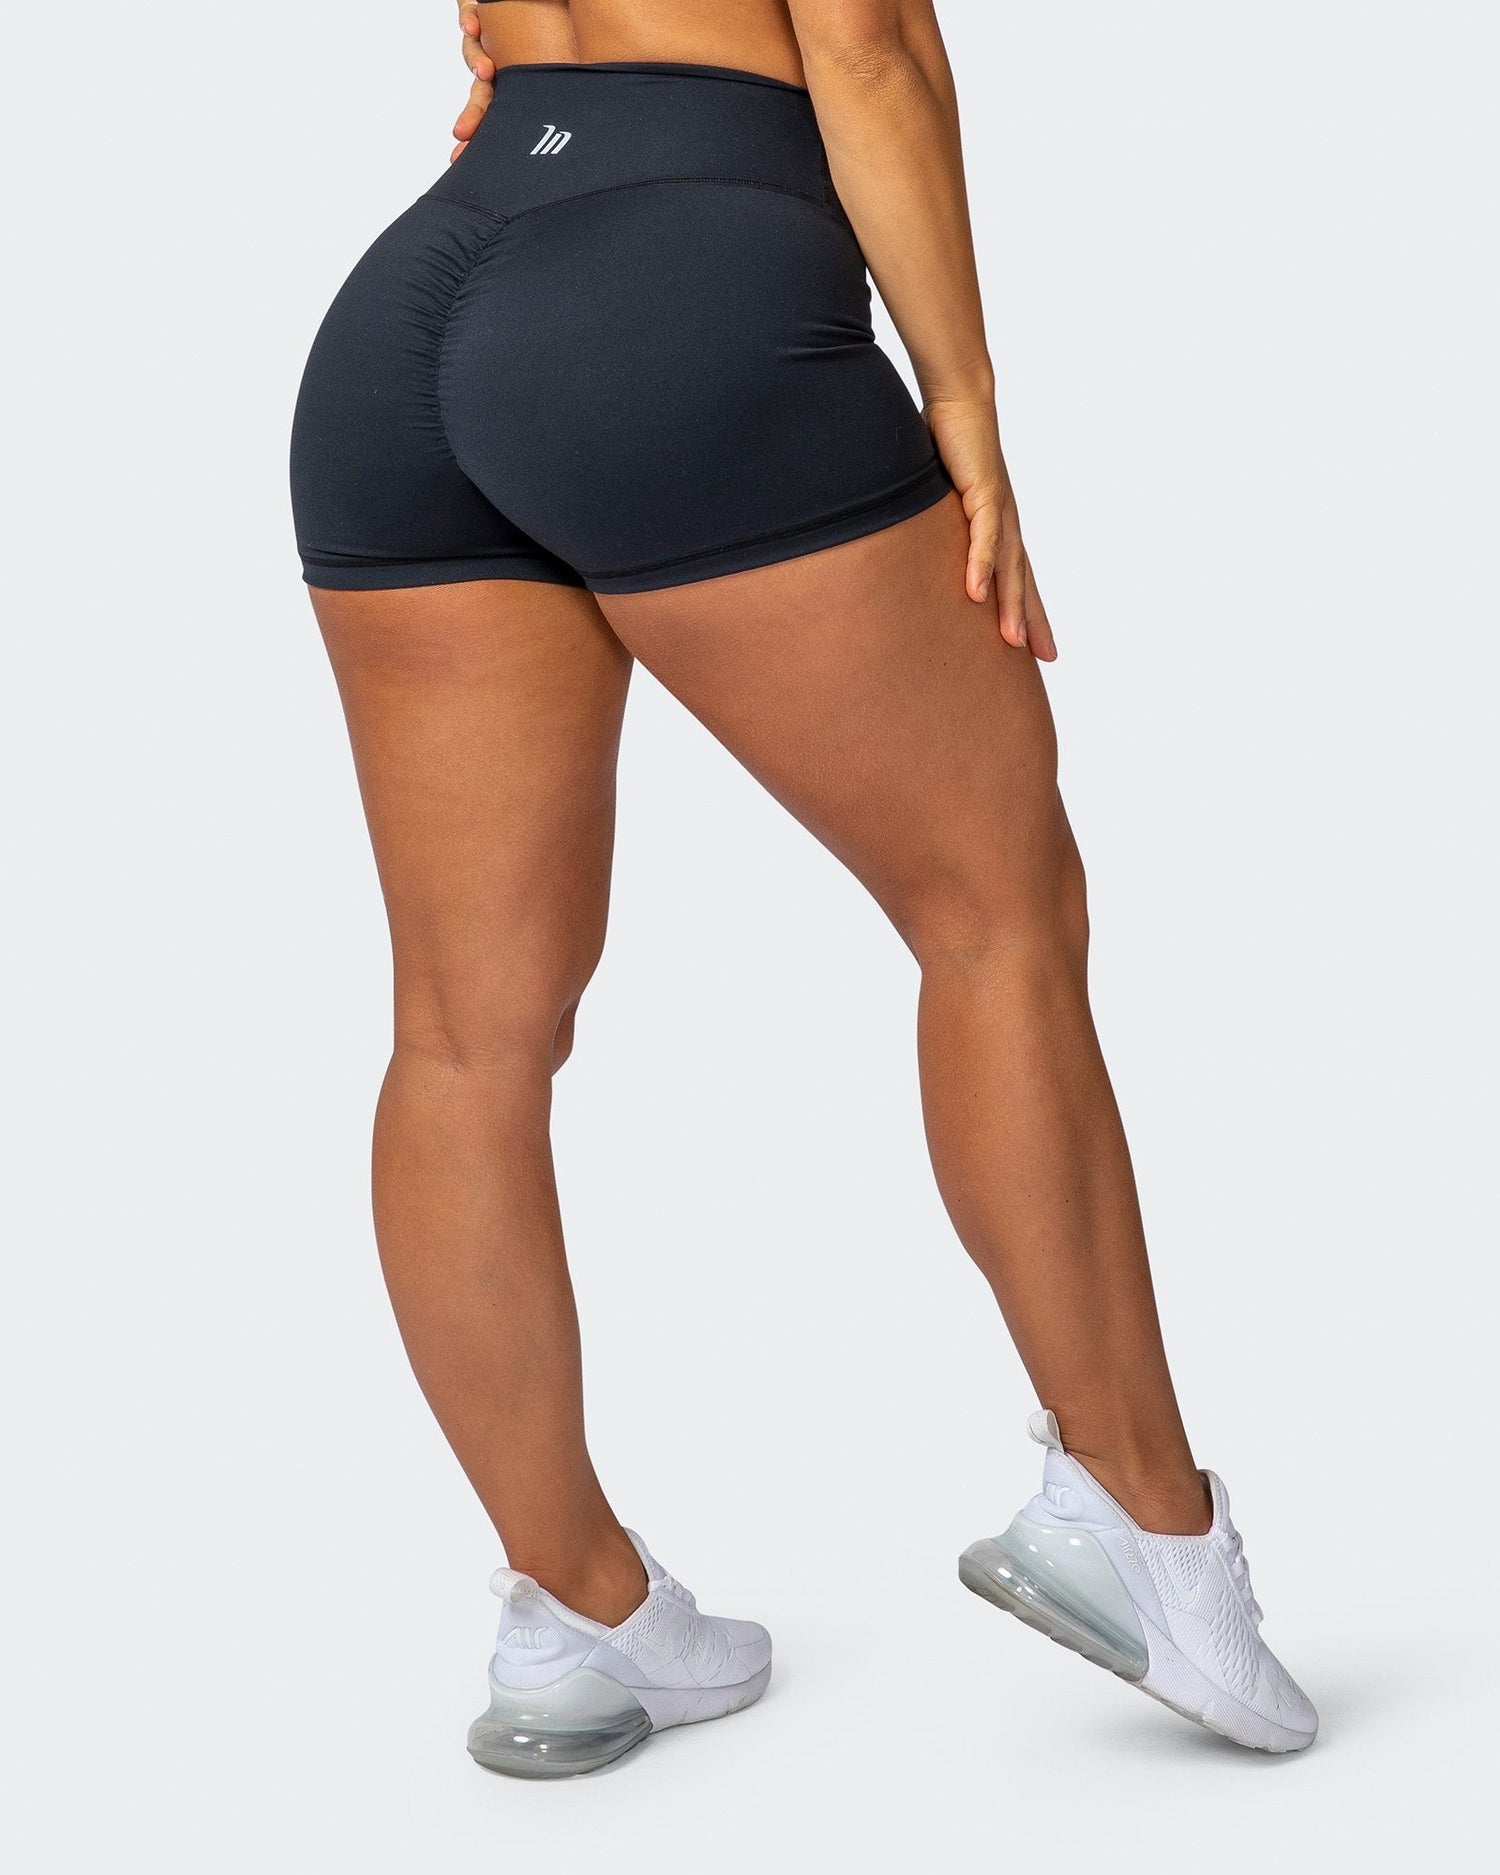 Signature Scrunch Booty Shorts - Black - Muscle Nation